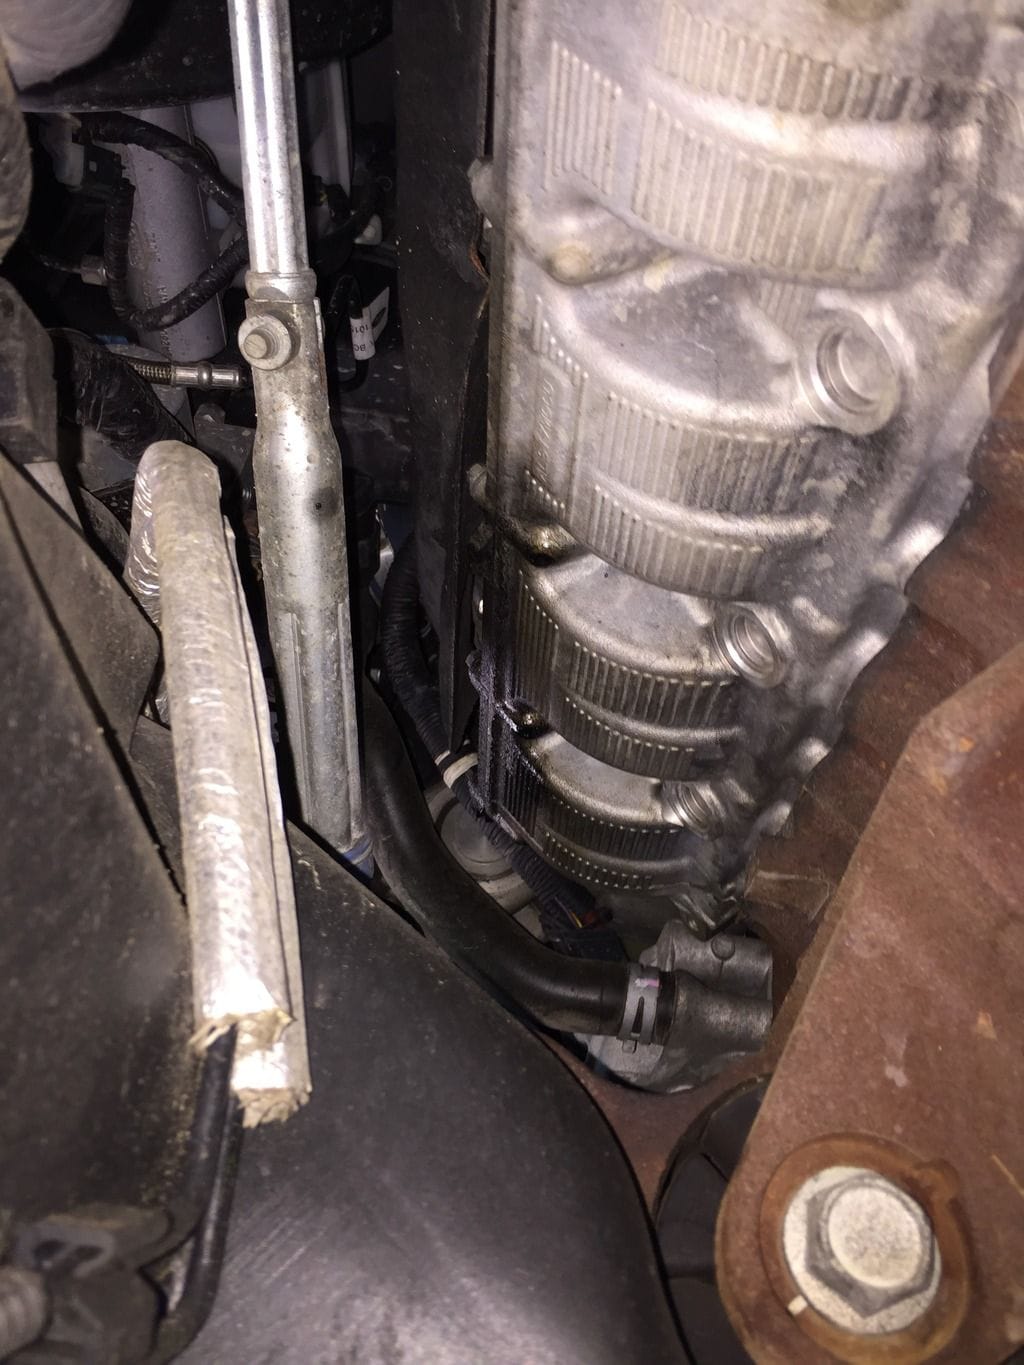 Minor Oil Leak - Ford Truck Enthusiasts Forums 6.4 Powerstroke Oil Leak Right Side Of Engine